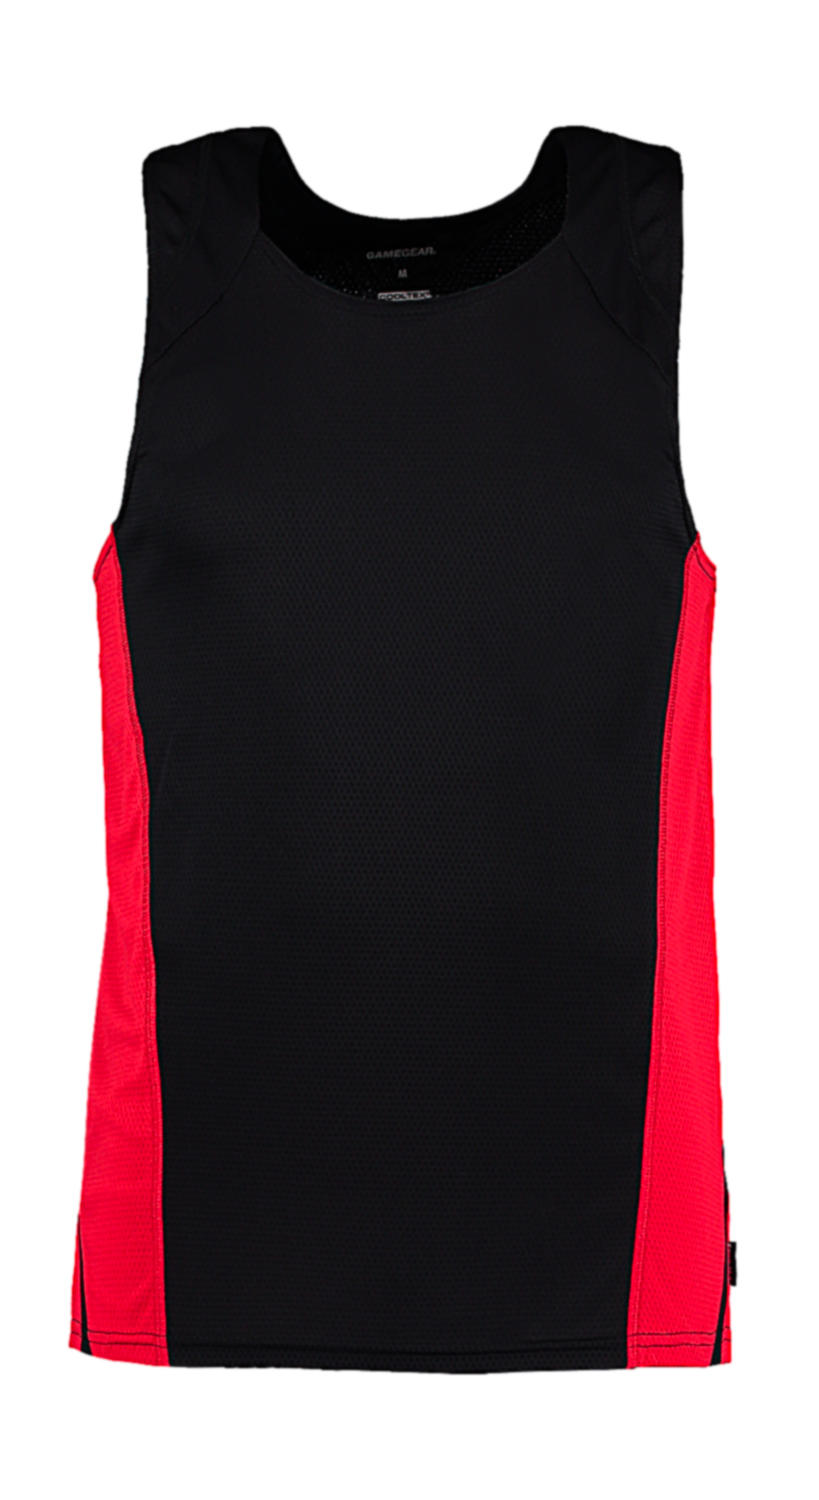  Regular Fit Cooltex? Vest  in Farbe Black/Red